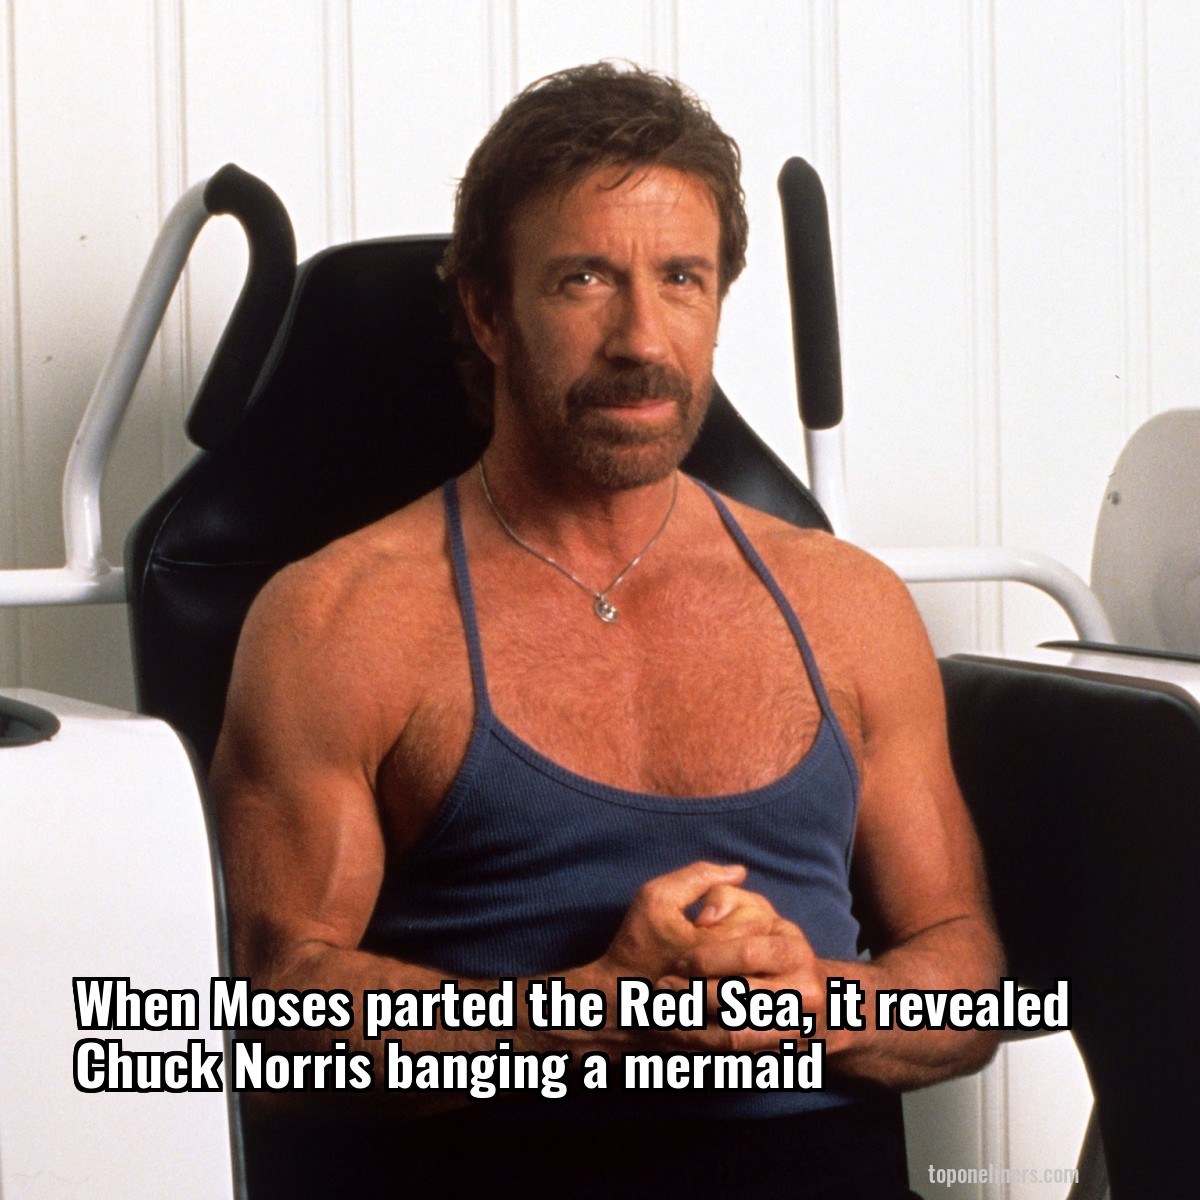 When Moses parted the Red Sea, it revealed Chuck Norris banging a mermaid